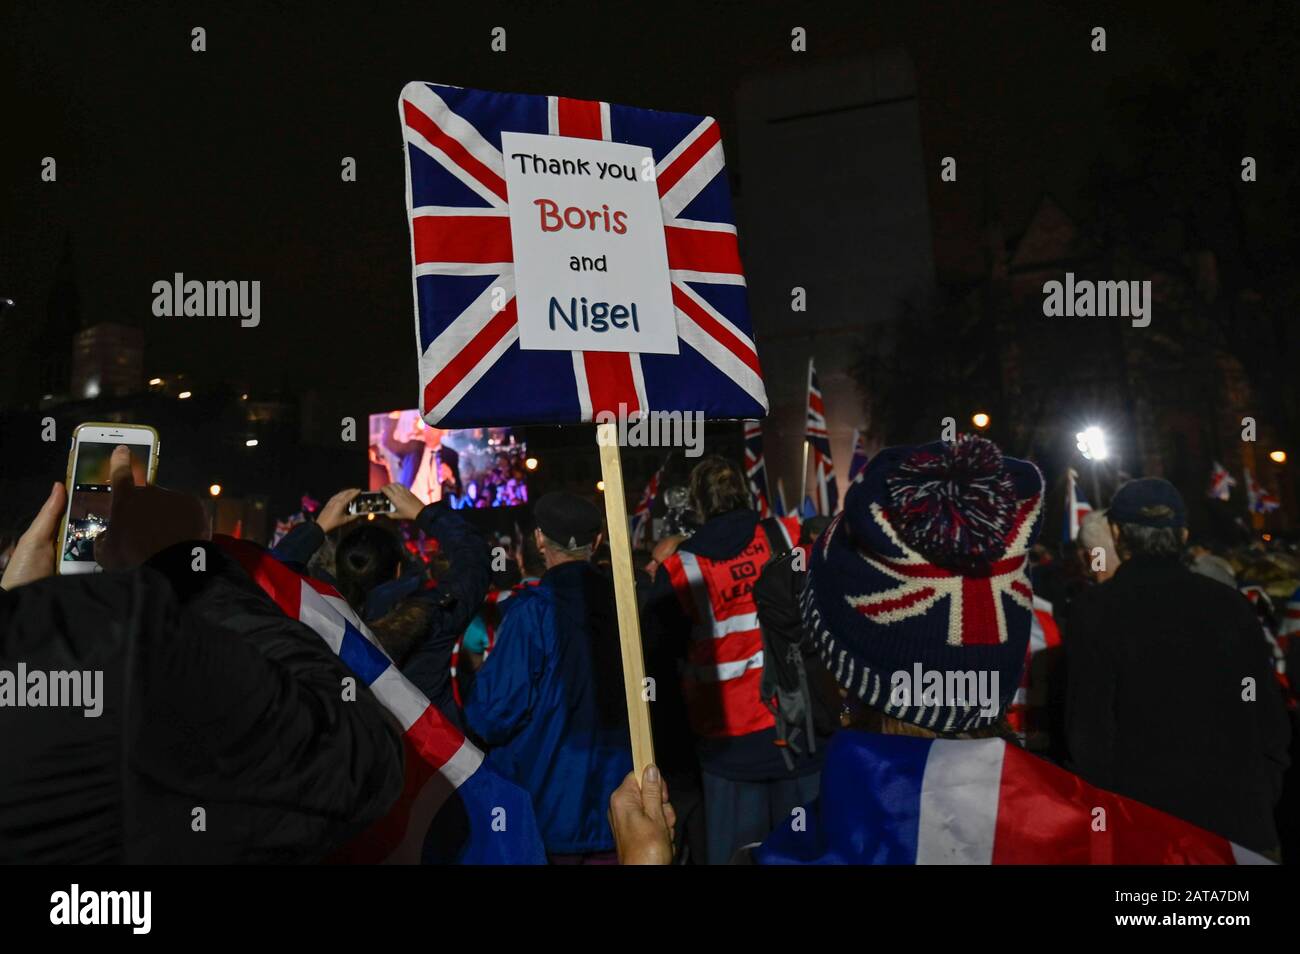 London, Britain. 31st Jan, 2020. Pro-Brexit supporters celebrate Brexit at a gathering at Parliament Square, in London, Britain, on Jan. 31, 2020. Britain officially left the European Union (EU) at 11 p.m. (2300 GMT) Friday, putting an end to its 47-year-long membership of the world's largest trading bloc. Credit: Stephen Chung/Xinhua/Alamy Live News Stock Photo